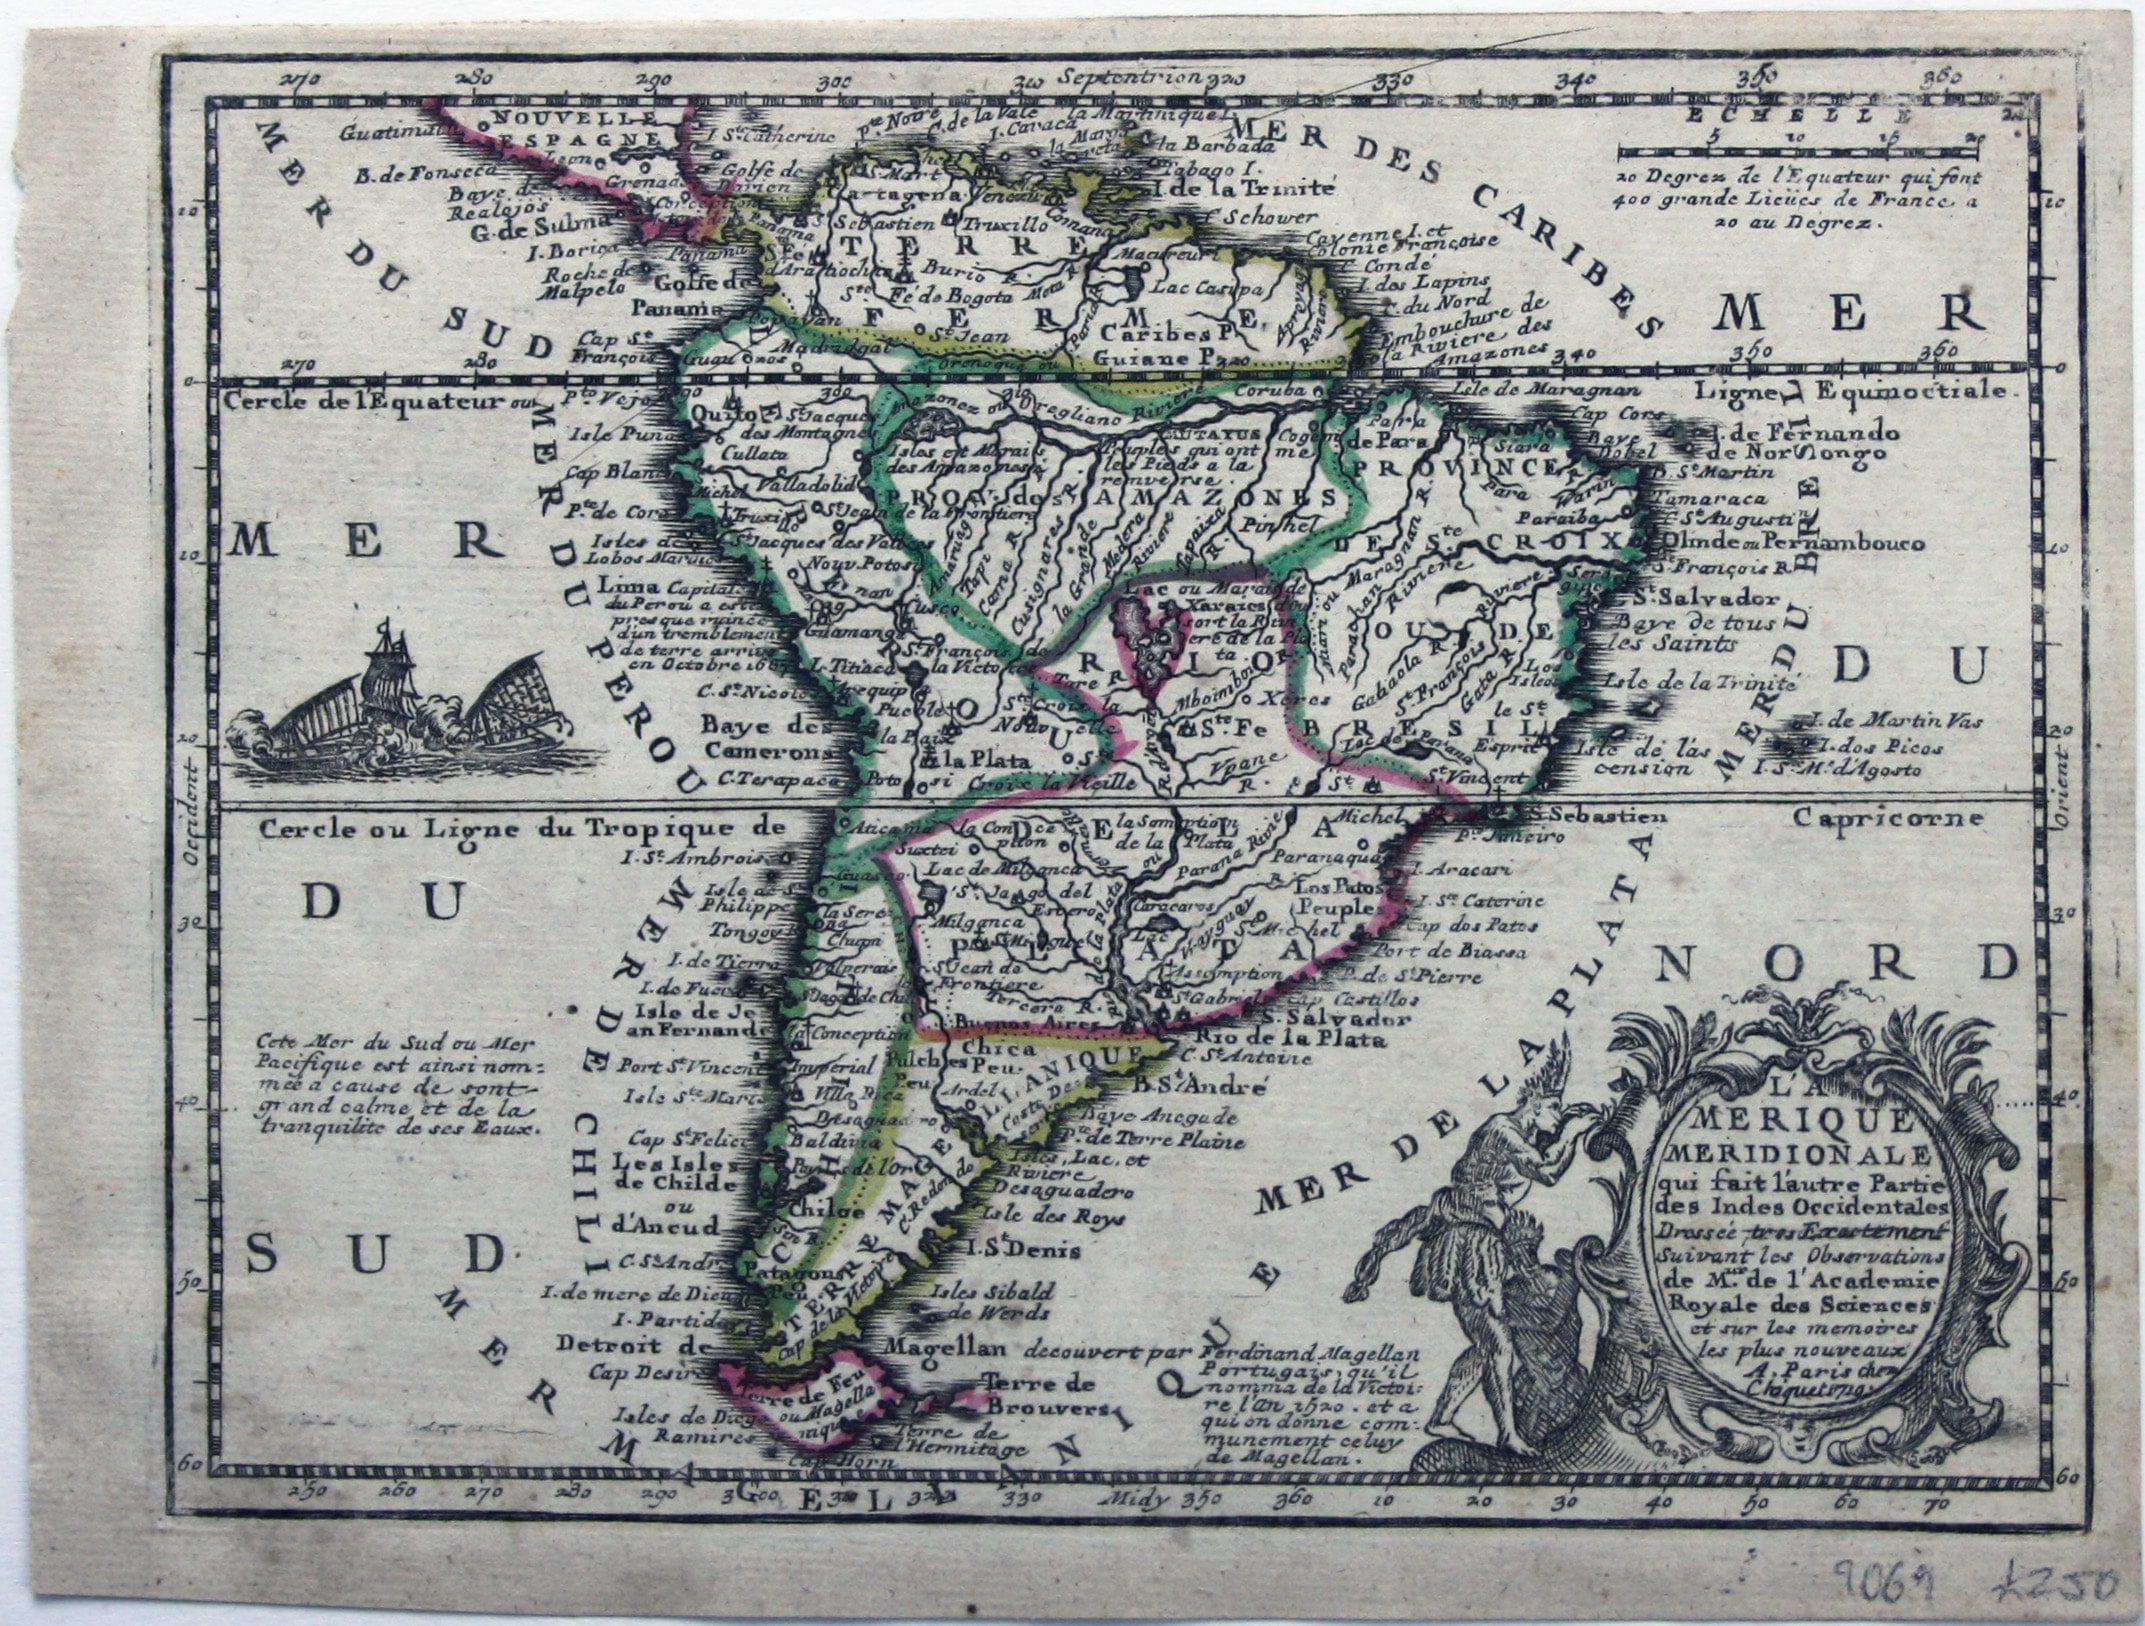 Chiquet’s Map of South America